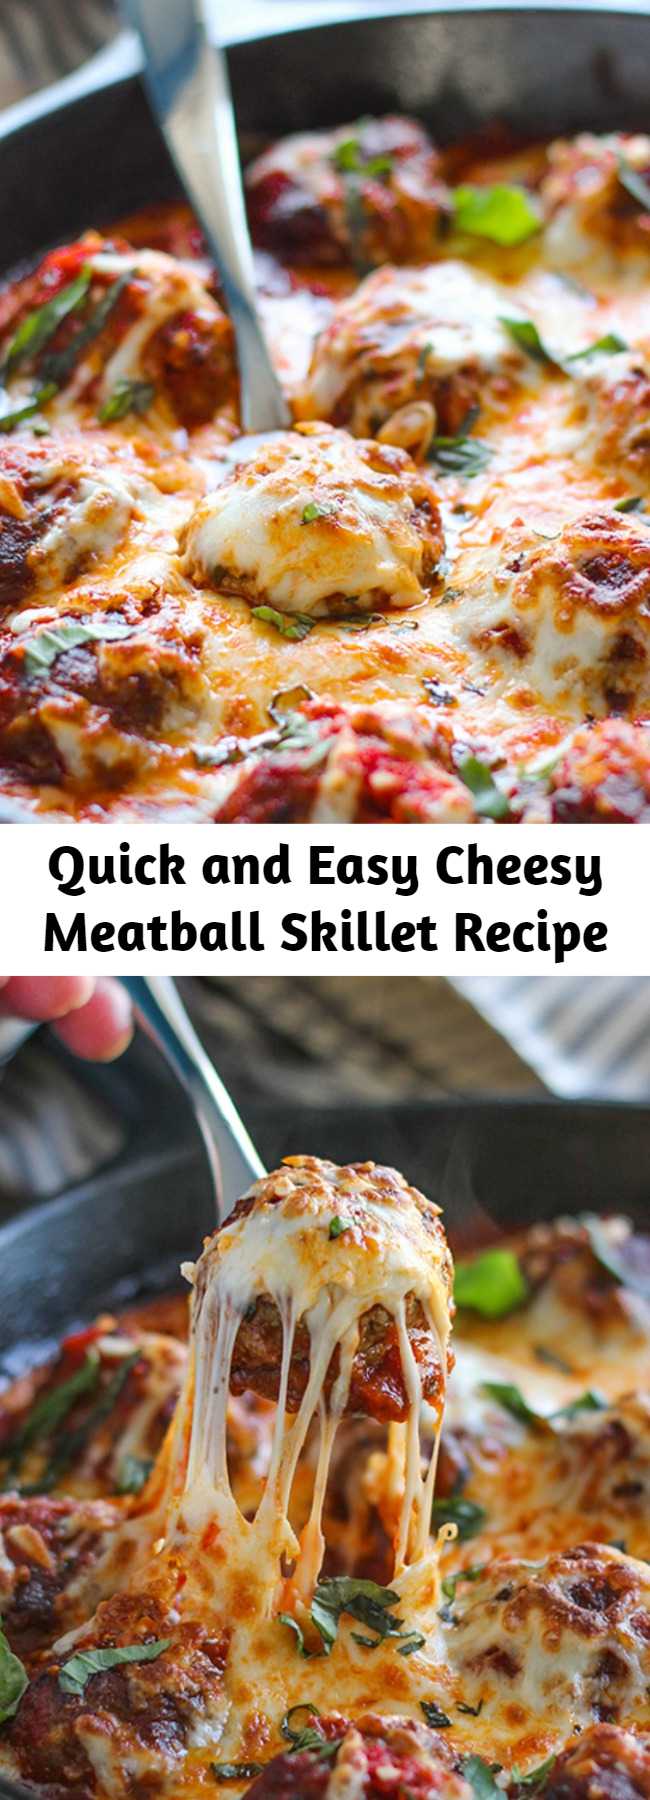 Quick and Easy Cheesy Meatball Skillet Recipe - This cheesy meatball skillet has so many ways to be enjoyed! Pop them in a sub or mix them with pasta, or have them with some bread!